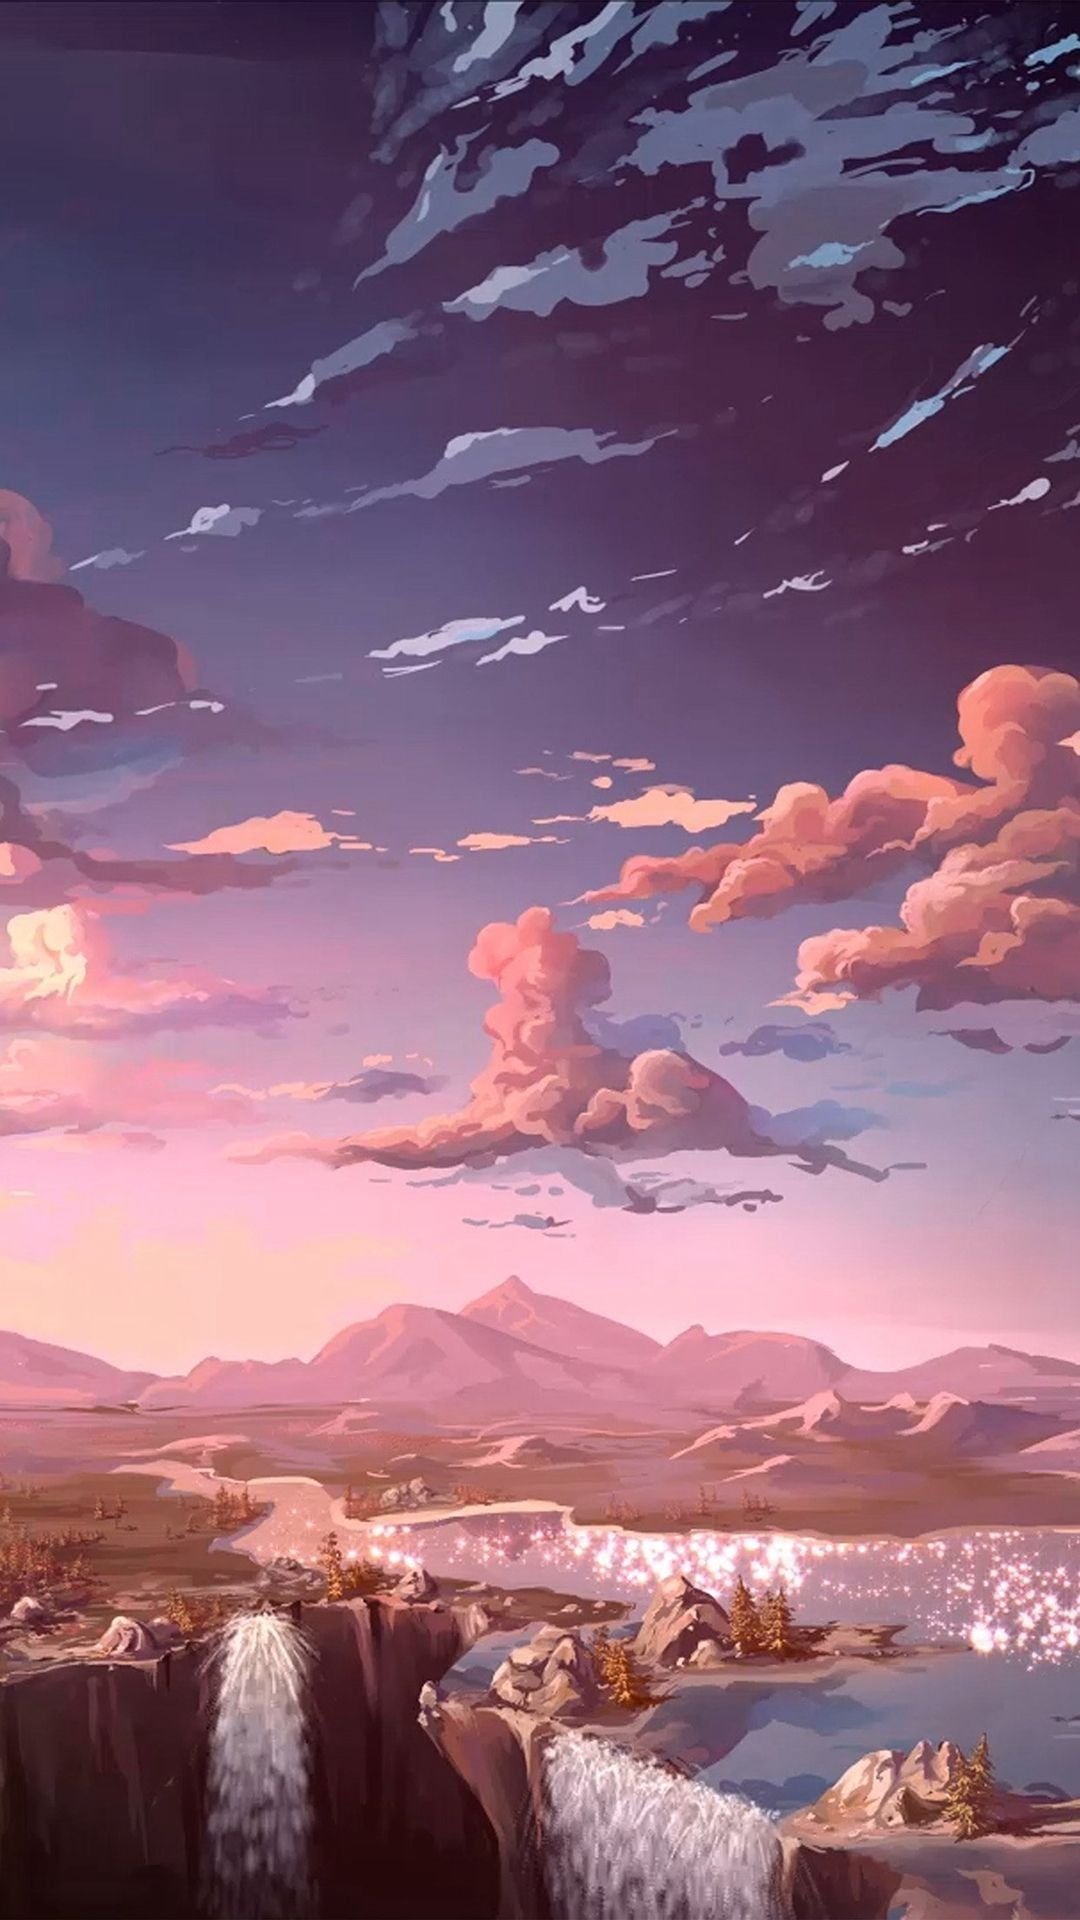 A painting of the sky and water with clouds - Pink anime, nature, art